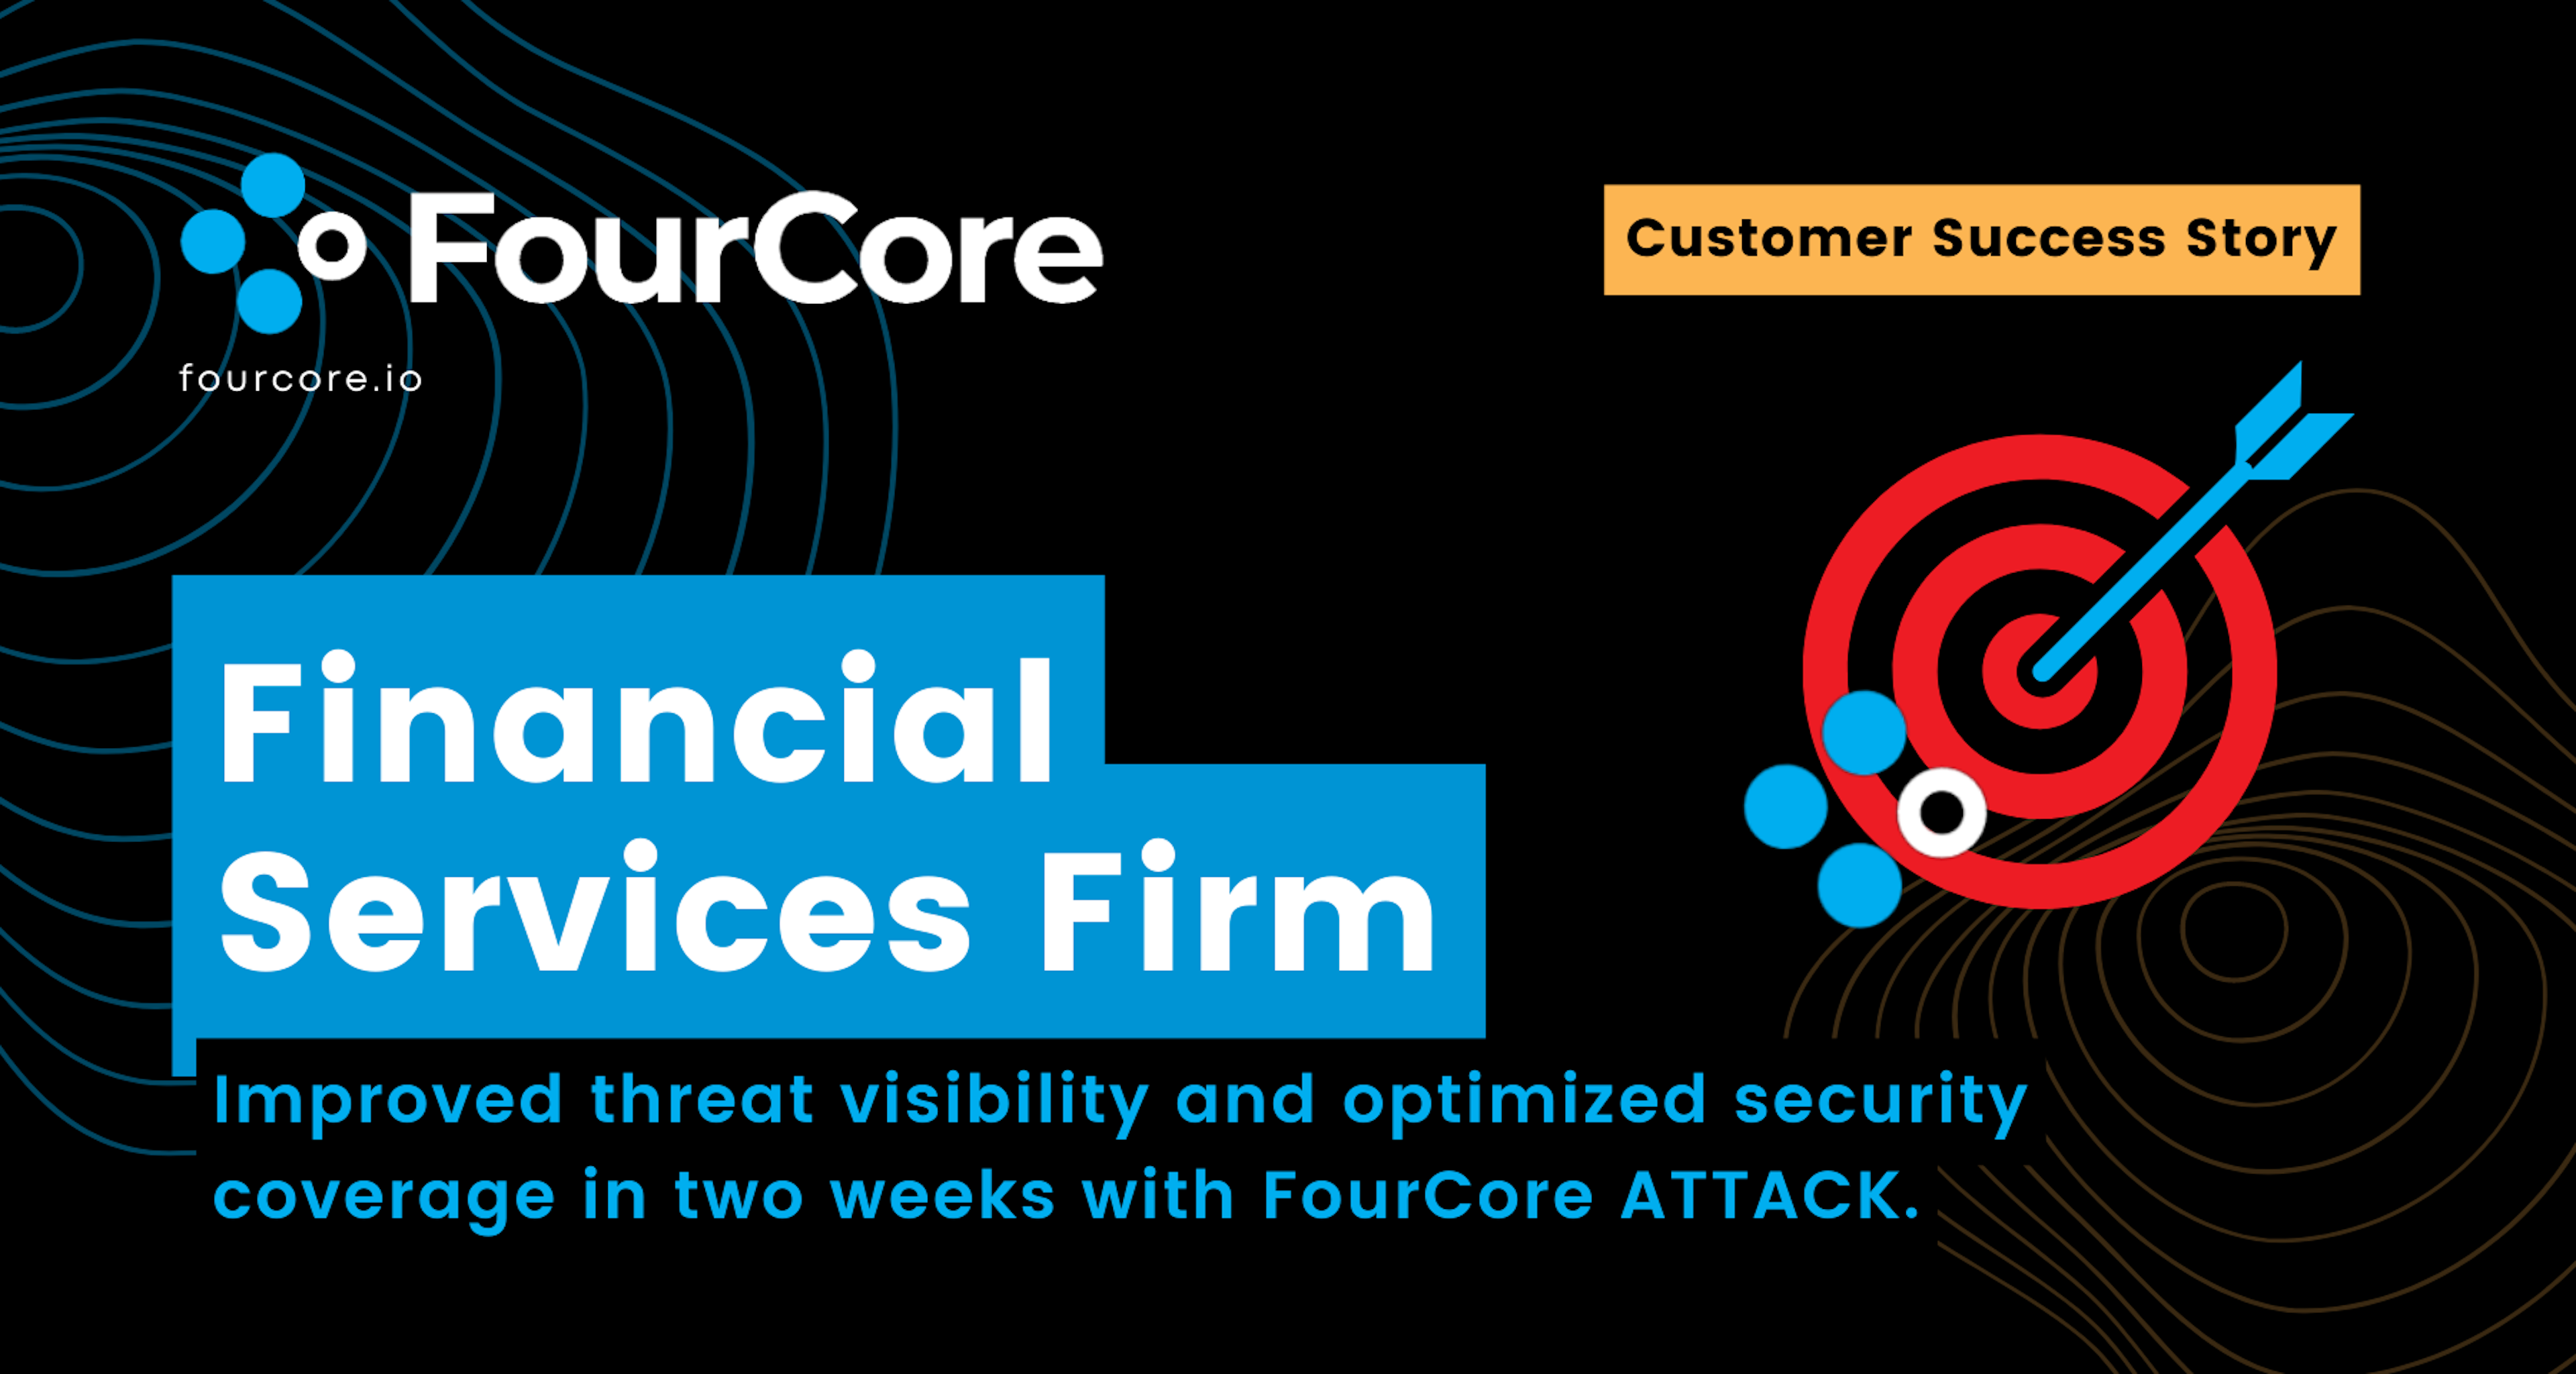 Customer Success Story: Financial Services Firm improved threat visibility in two weeks Blog Post Image